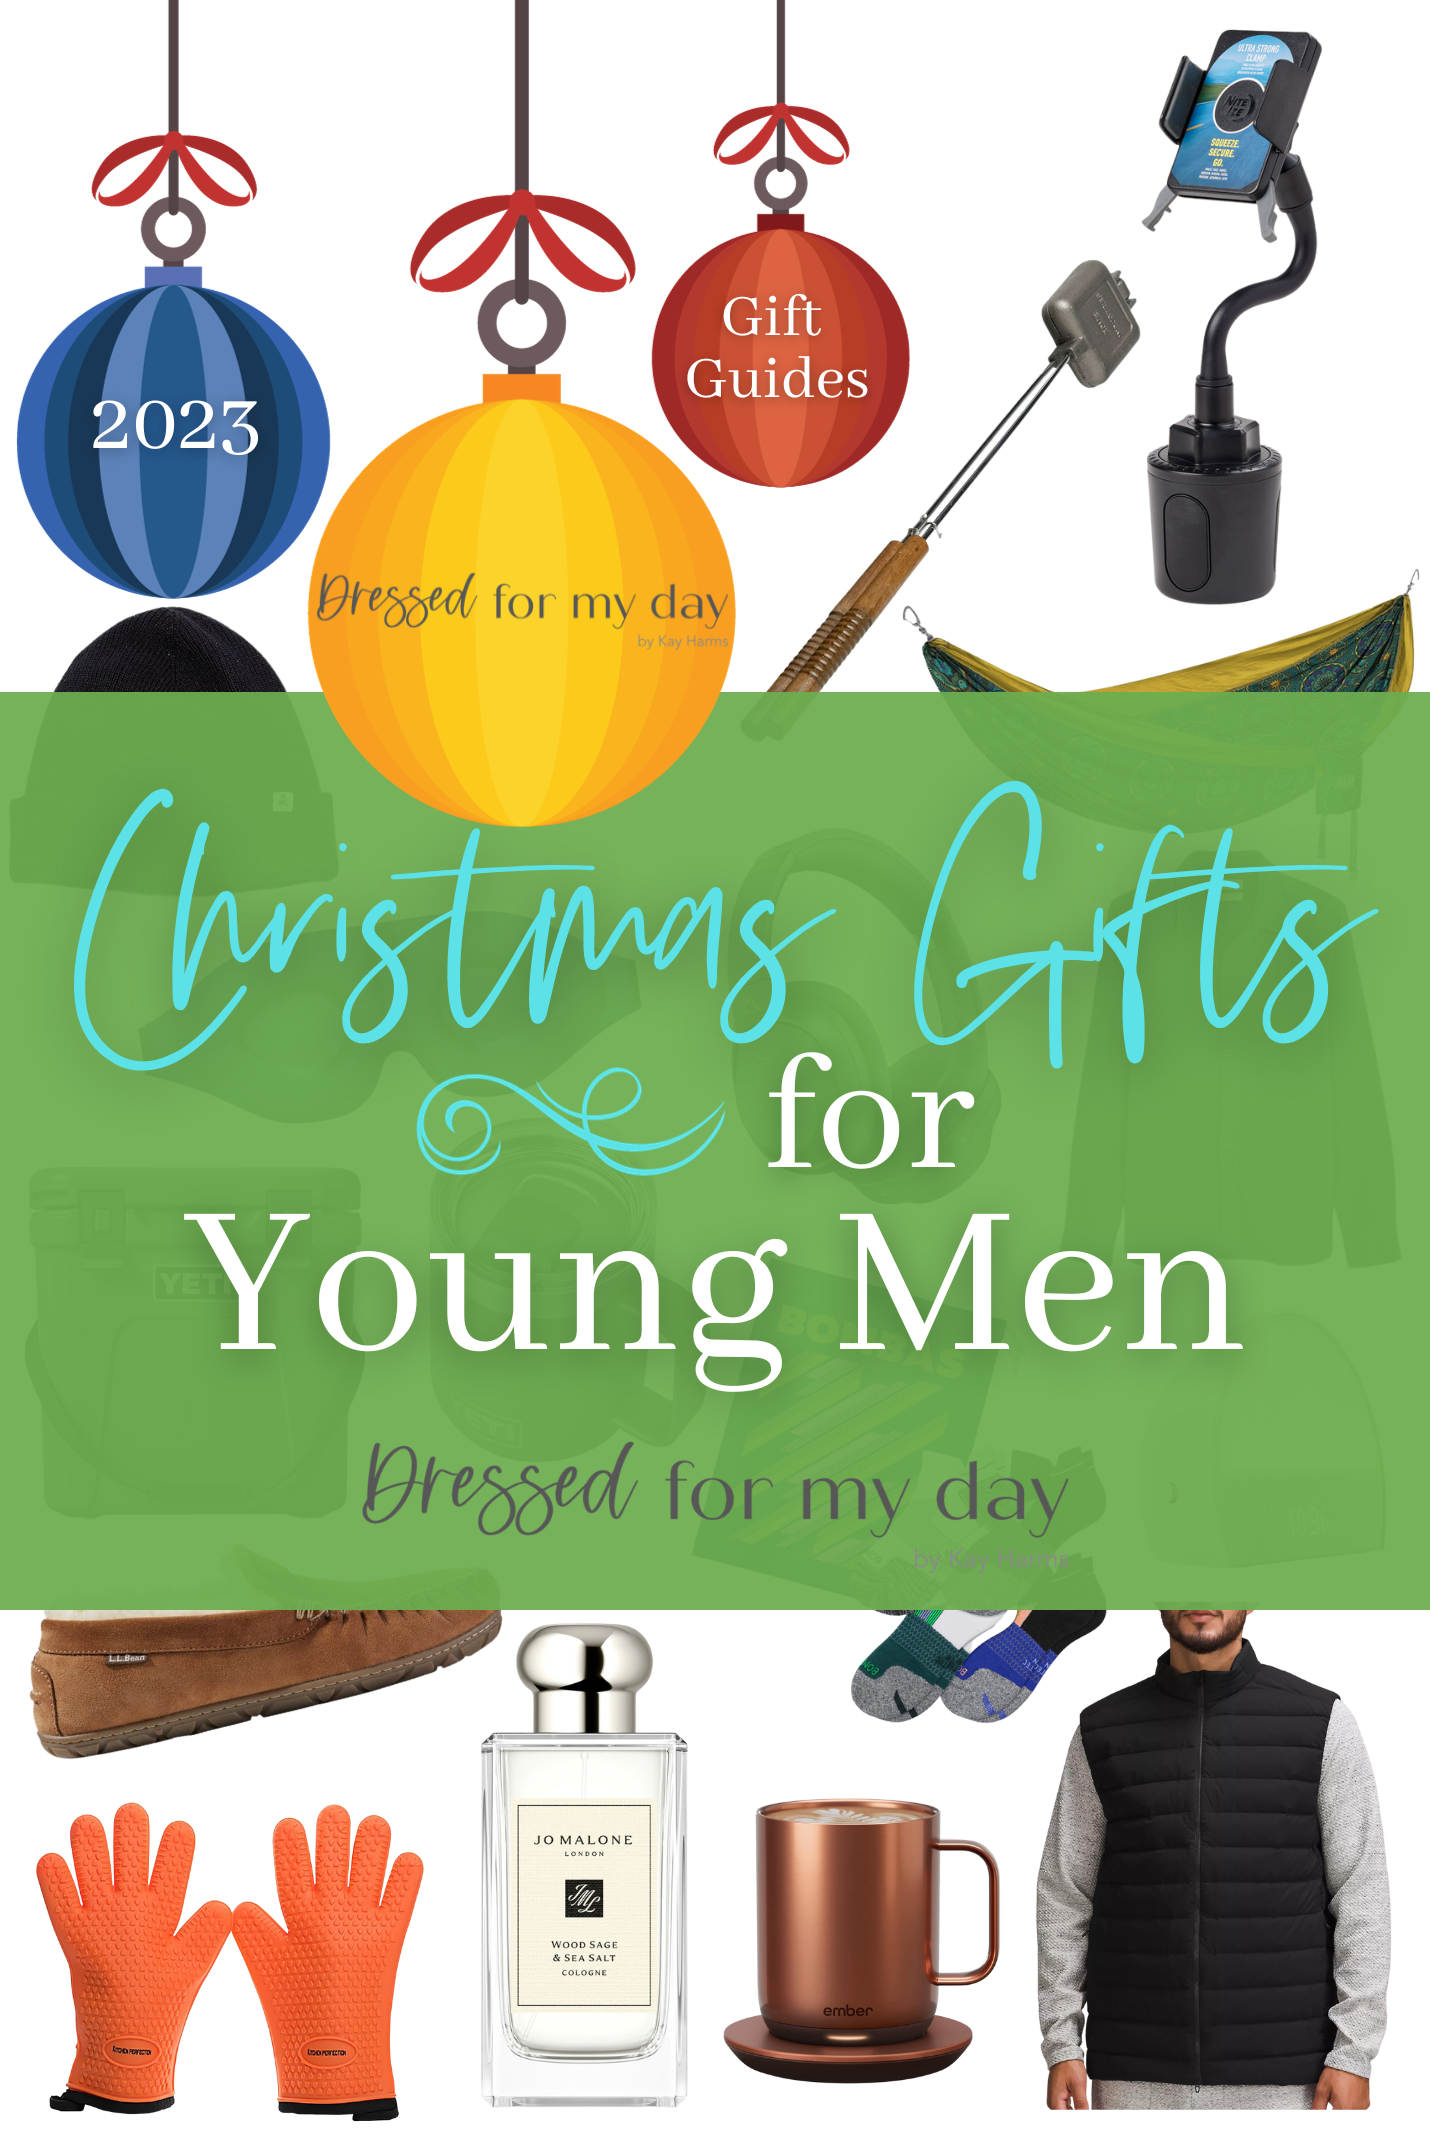 Christmas Gifts for Young Men